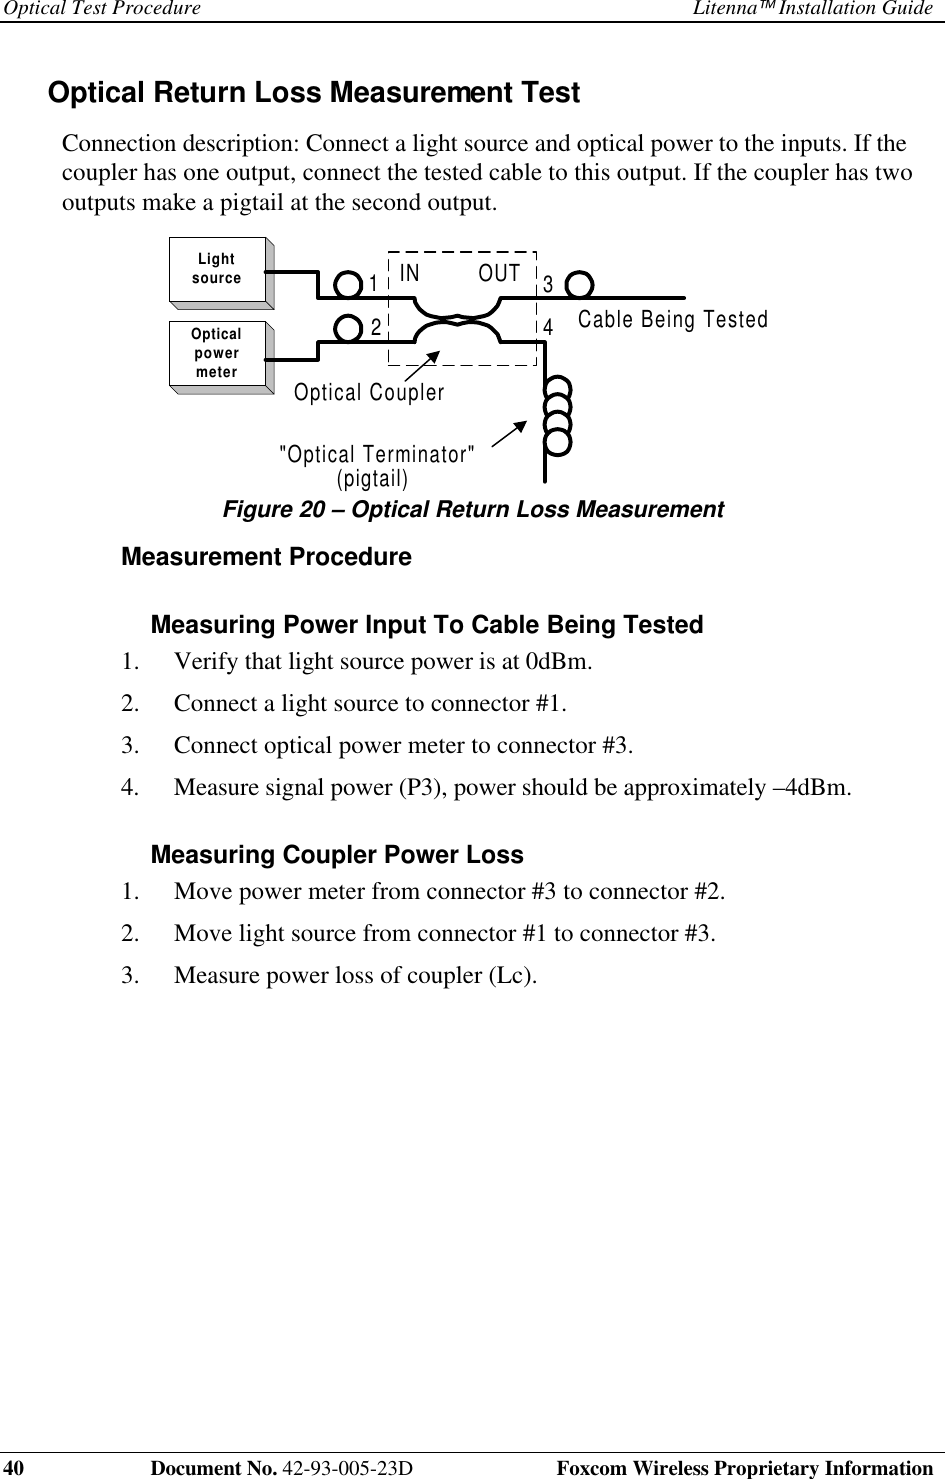 Optical Test Procedure Litenna Installation Guide40    Document No. 42-93-005-23D  Foxcom Wireless Proprietary InformationOptical Return Loss Measurement TestConnection description: Connect a light source and optical power to the inputs. If thecoupler has one output, connect the tested cable to this output. If the coupler has twooutputs make a pigtail at the second output.LightsourceOpticalpowermeterIN         OUT(pigtail)Cable Being Tested2134&quot;Optical Terminator&quot;Optical CouplerFigure 20 – Optical Return Loss MeasurementMeasurement ProcedureMeasuring Power Input To Cable Being Tested1.  Verify that light source power is at 0dBm.2.  Connect a light source to connector #1.3.  Connect optical power meter to connector #3.4.  Measure signal power (P3), power should be approximately –4dBm.Measuring Coupler Power Loss1.  Move power meter from connector #3 to connector #2.2.  Move light source from connector #1 to connector #3.3.  Measure power loss of coupler (Lc).